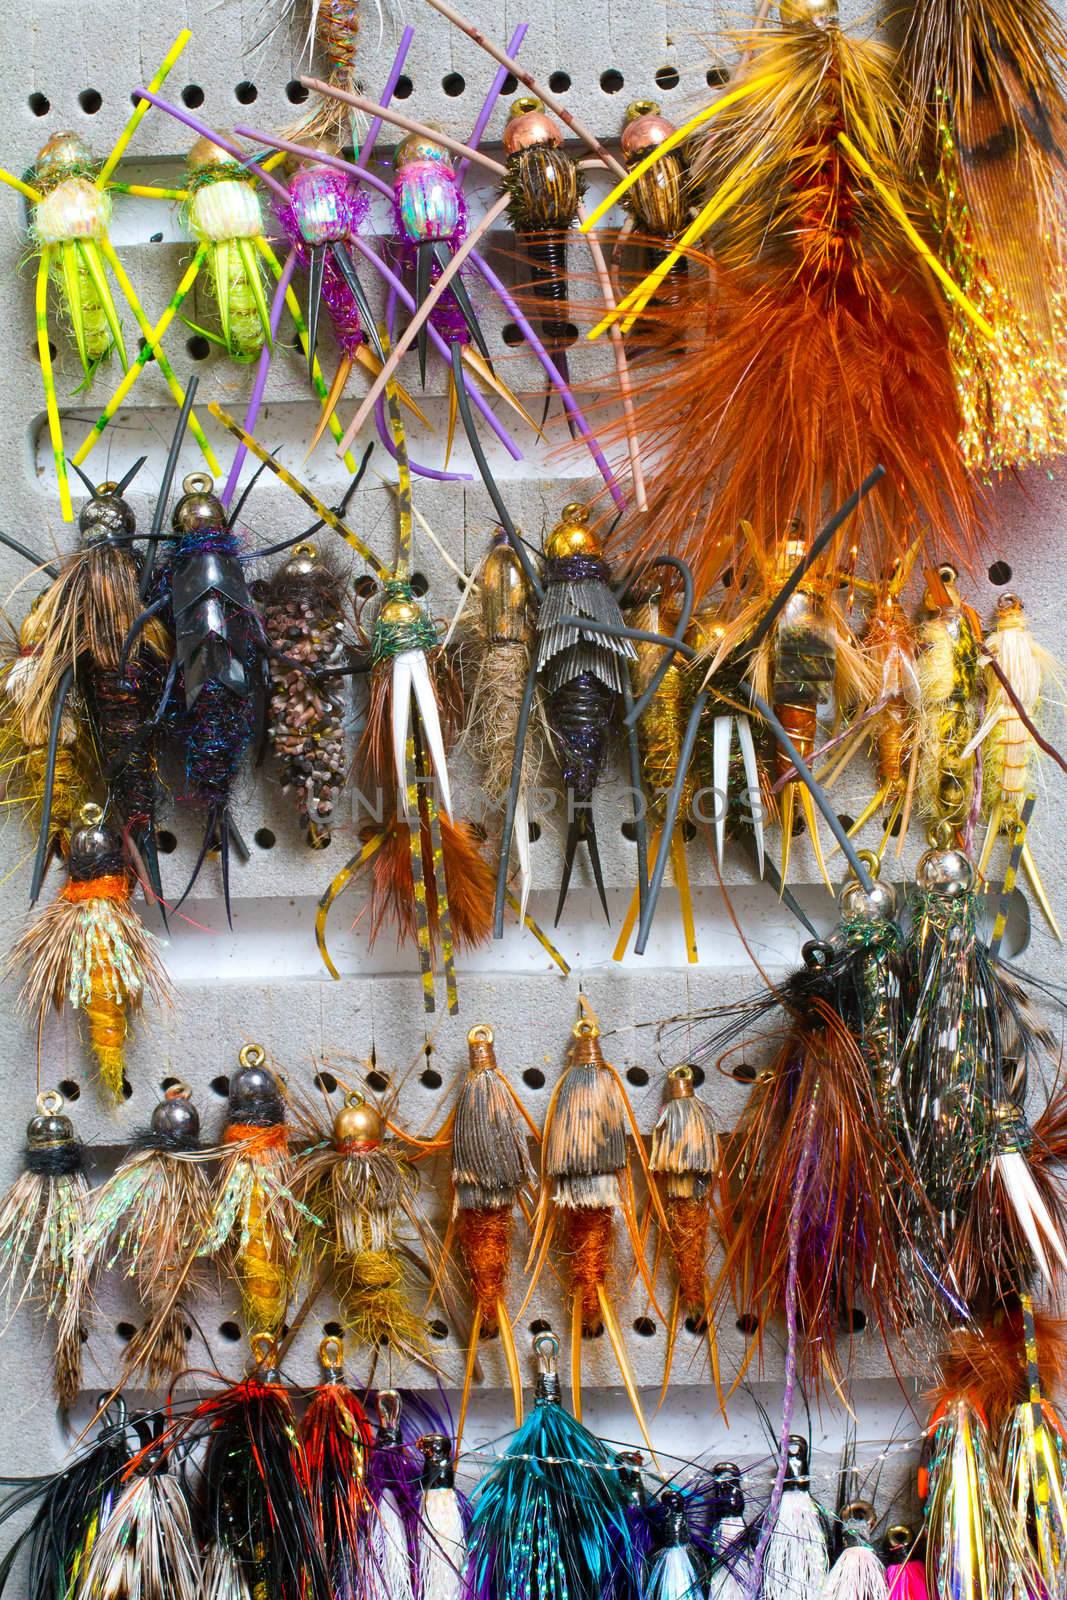 Nymphs and streamers are in this fly fishing box showing the variety of flies used to catch fish in this recreational pursuit.